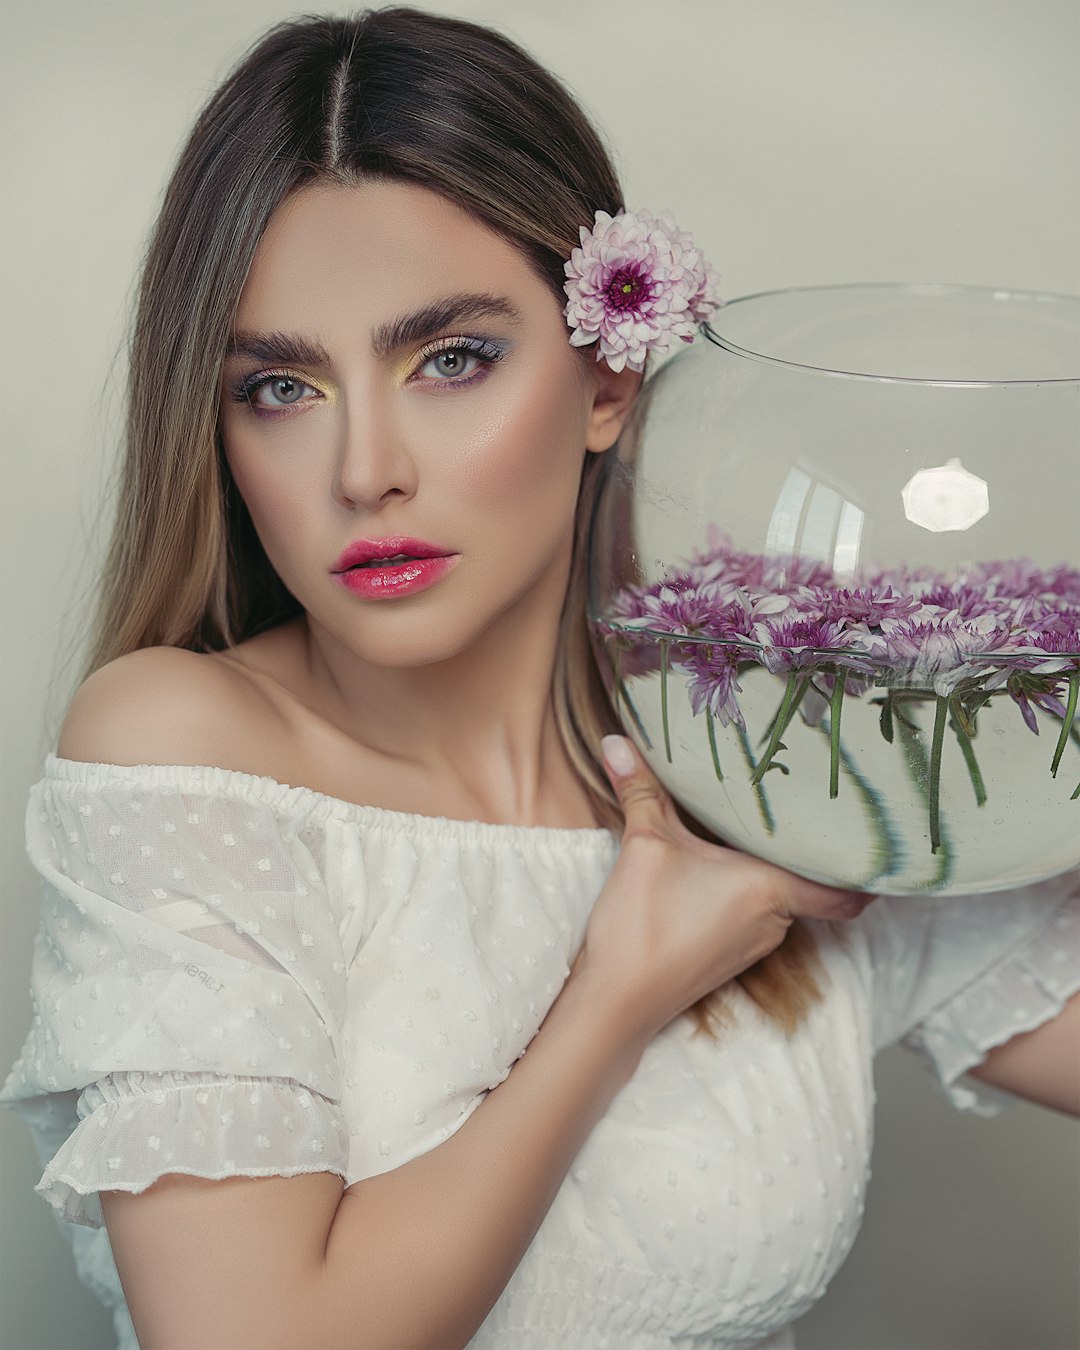 woman in white floral dress holding clear glass bowl with pink flowers